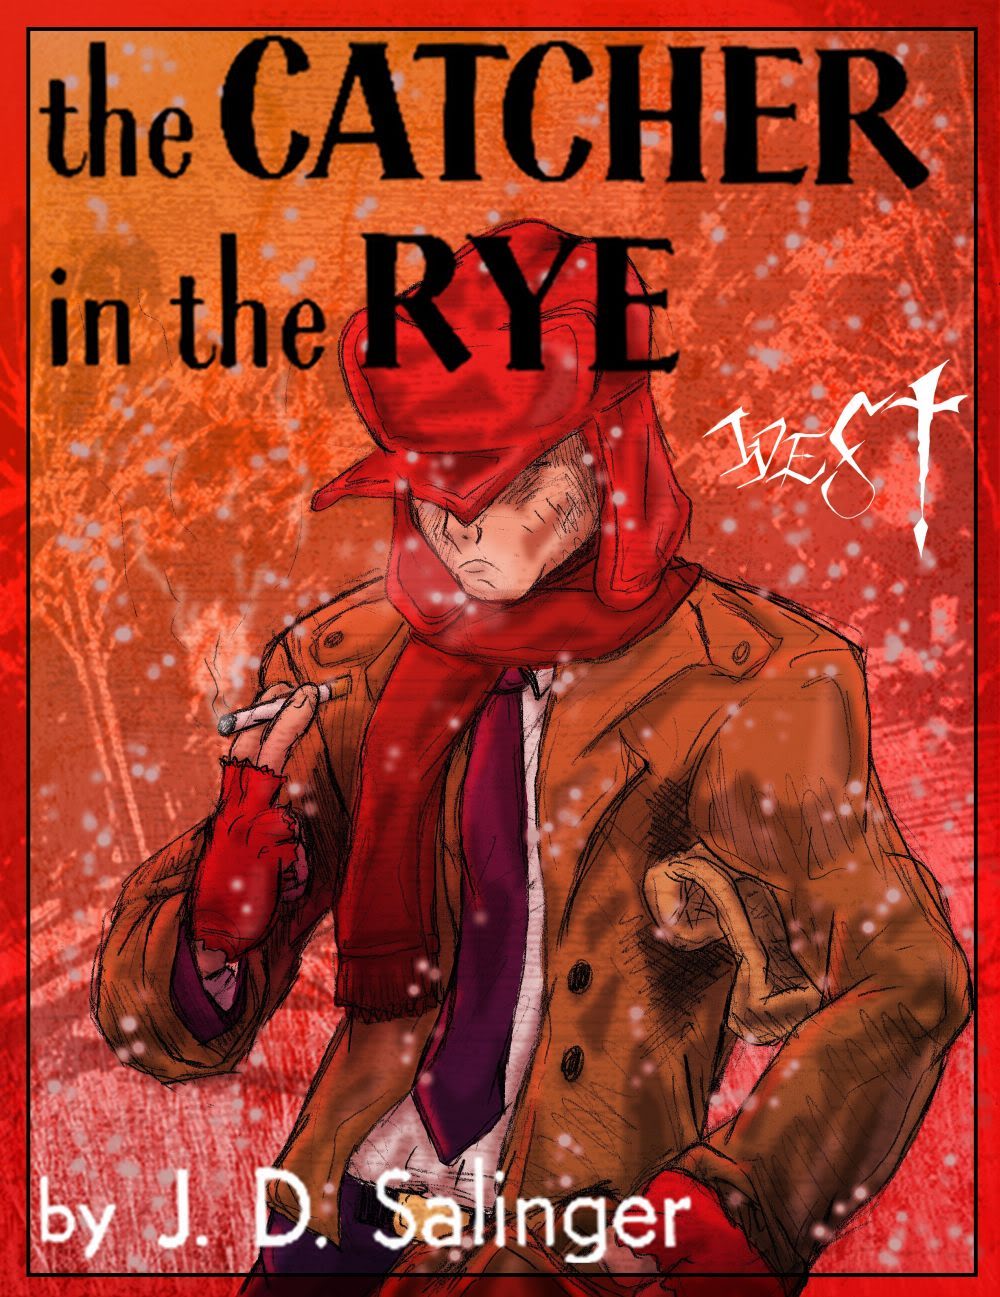 Catcher in the rye essay prompts